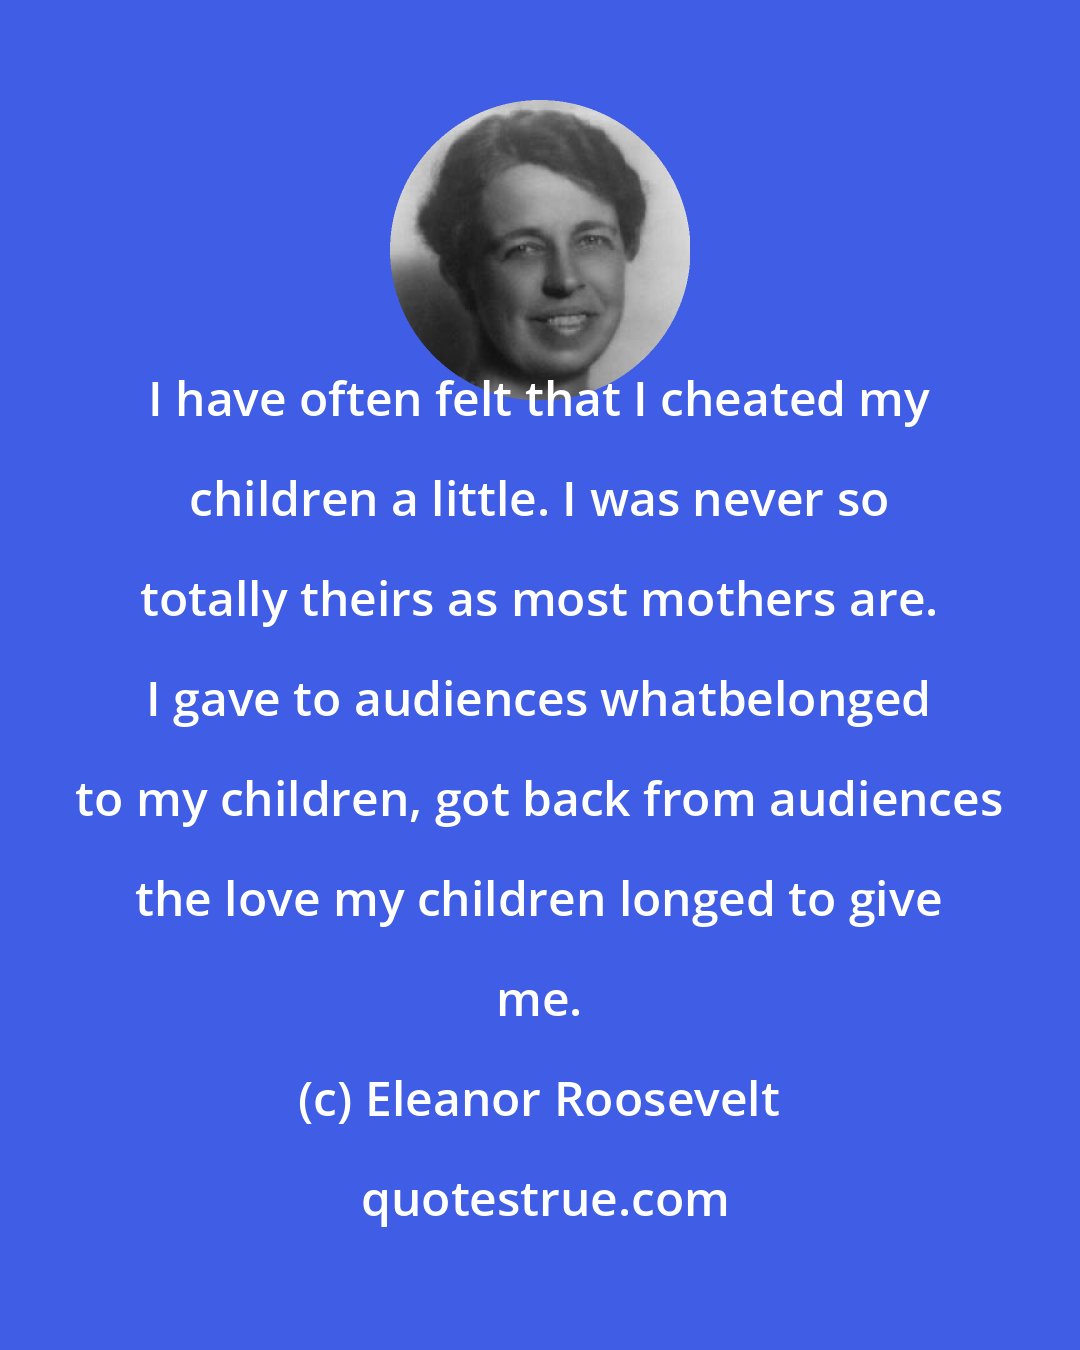 Eleanor Roosevelt: I have often felt that I cheated my children a little. I was never so totally theirs as most mothers are. I gave to audiences whatbelonged to my children, got back from audiences the love my children longed to give me.